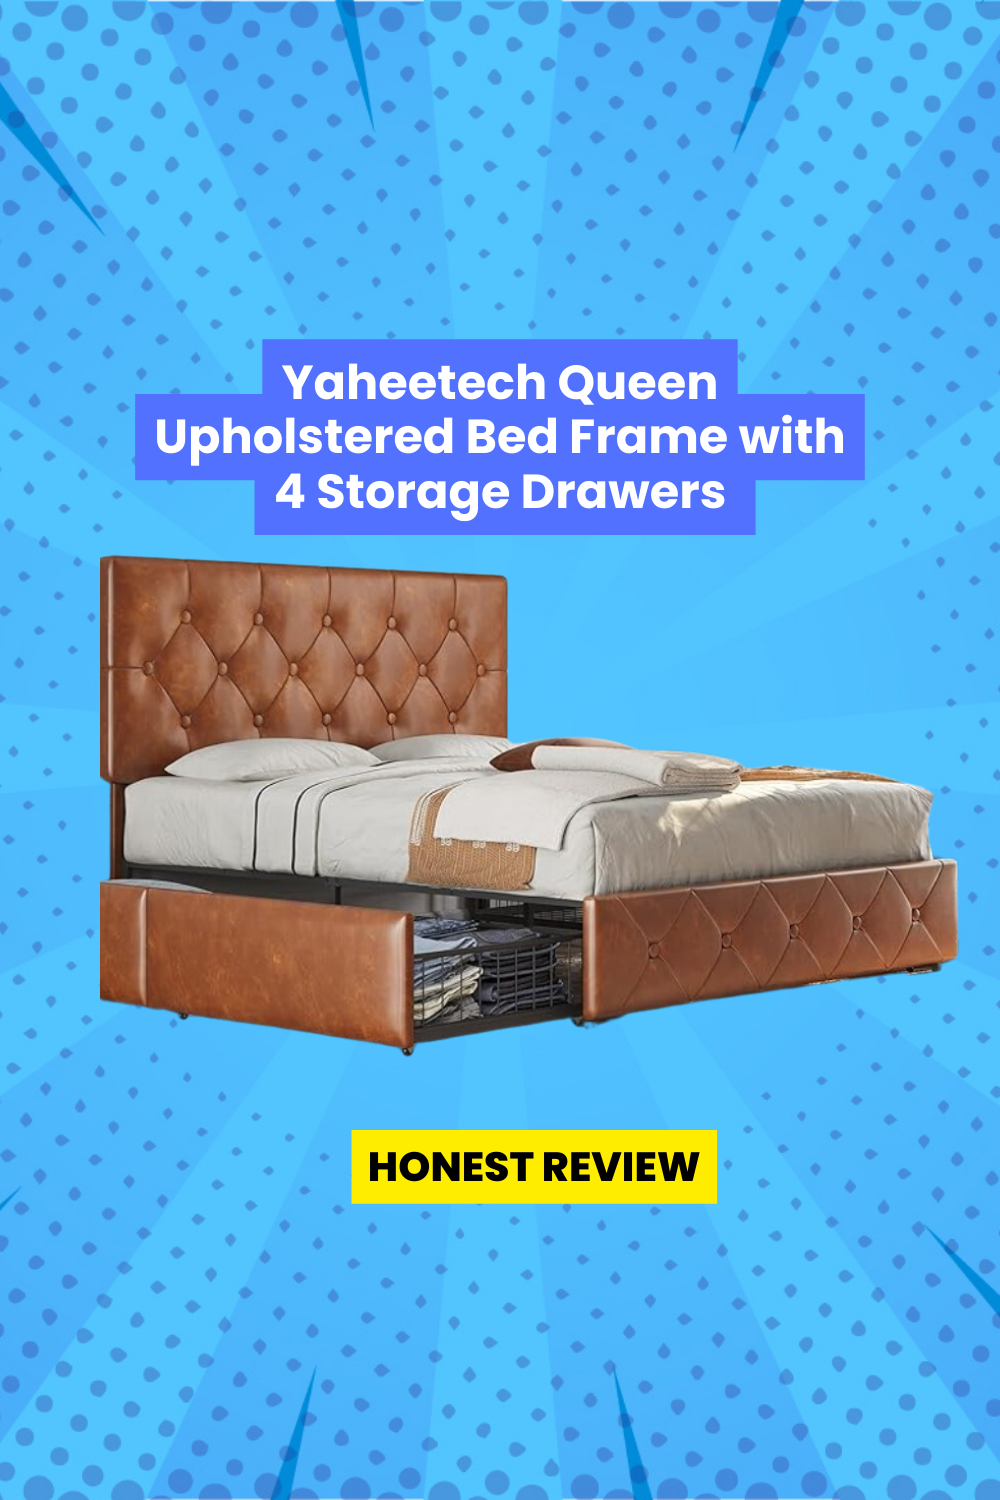 Yaheetech, Queen bed frame, Upholstered bed frame, Storage bed frame, Adjustable headboard, Faux leather bed frame, Platform bed, Mattress foundation, Wooden slats, No box spring needed, Amber brown, Bedroom storage, Drawer bed frame, Space-saving bed frame, Home organization, Bedroom furniture, Diamond tufted headboard, Sturdy bed frame, Durable construction, Easy assembly, Comfortable bed frame, High-grade materials, Interior steel framework, Premium wooden slats, Maximum weight capacity, Stylish design, Bedroom decor, Storage solutions, Convenient drawers, Clutter-free bedroom, Restful sleep, Long-lasting mattress, Extend mattress life, Foam padding, Noise-free sleep, Bedroom upgrade, Versatile bed frame, Modern design, Home improvement, Bedroom makeover, Sleep in style, Functional furniture, Quality craftsmanship, Affordable bed frame, Value for money, Furniture with storage, Easy maintenance, Bed frame with drawers